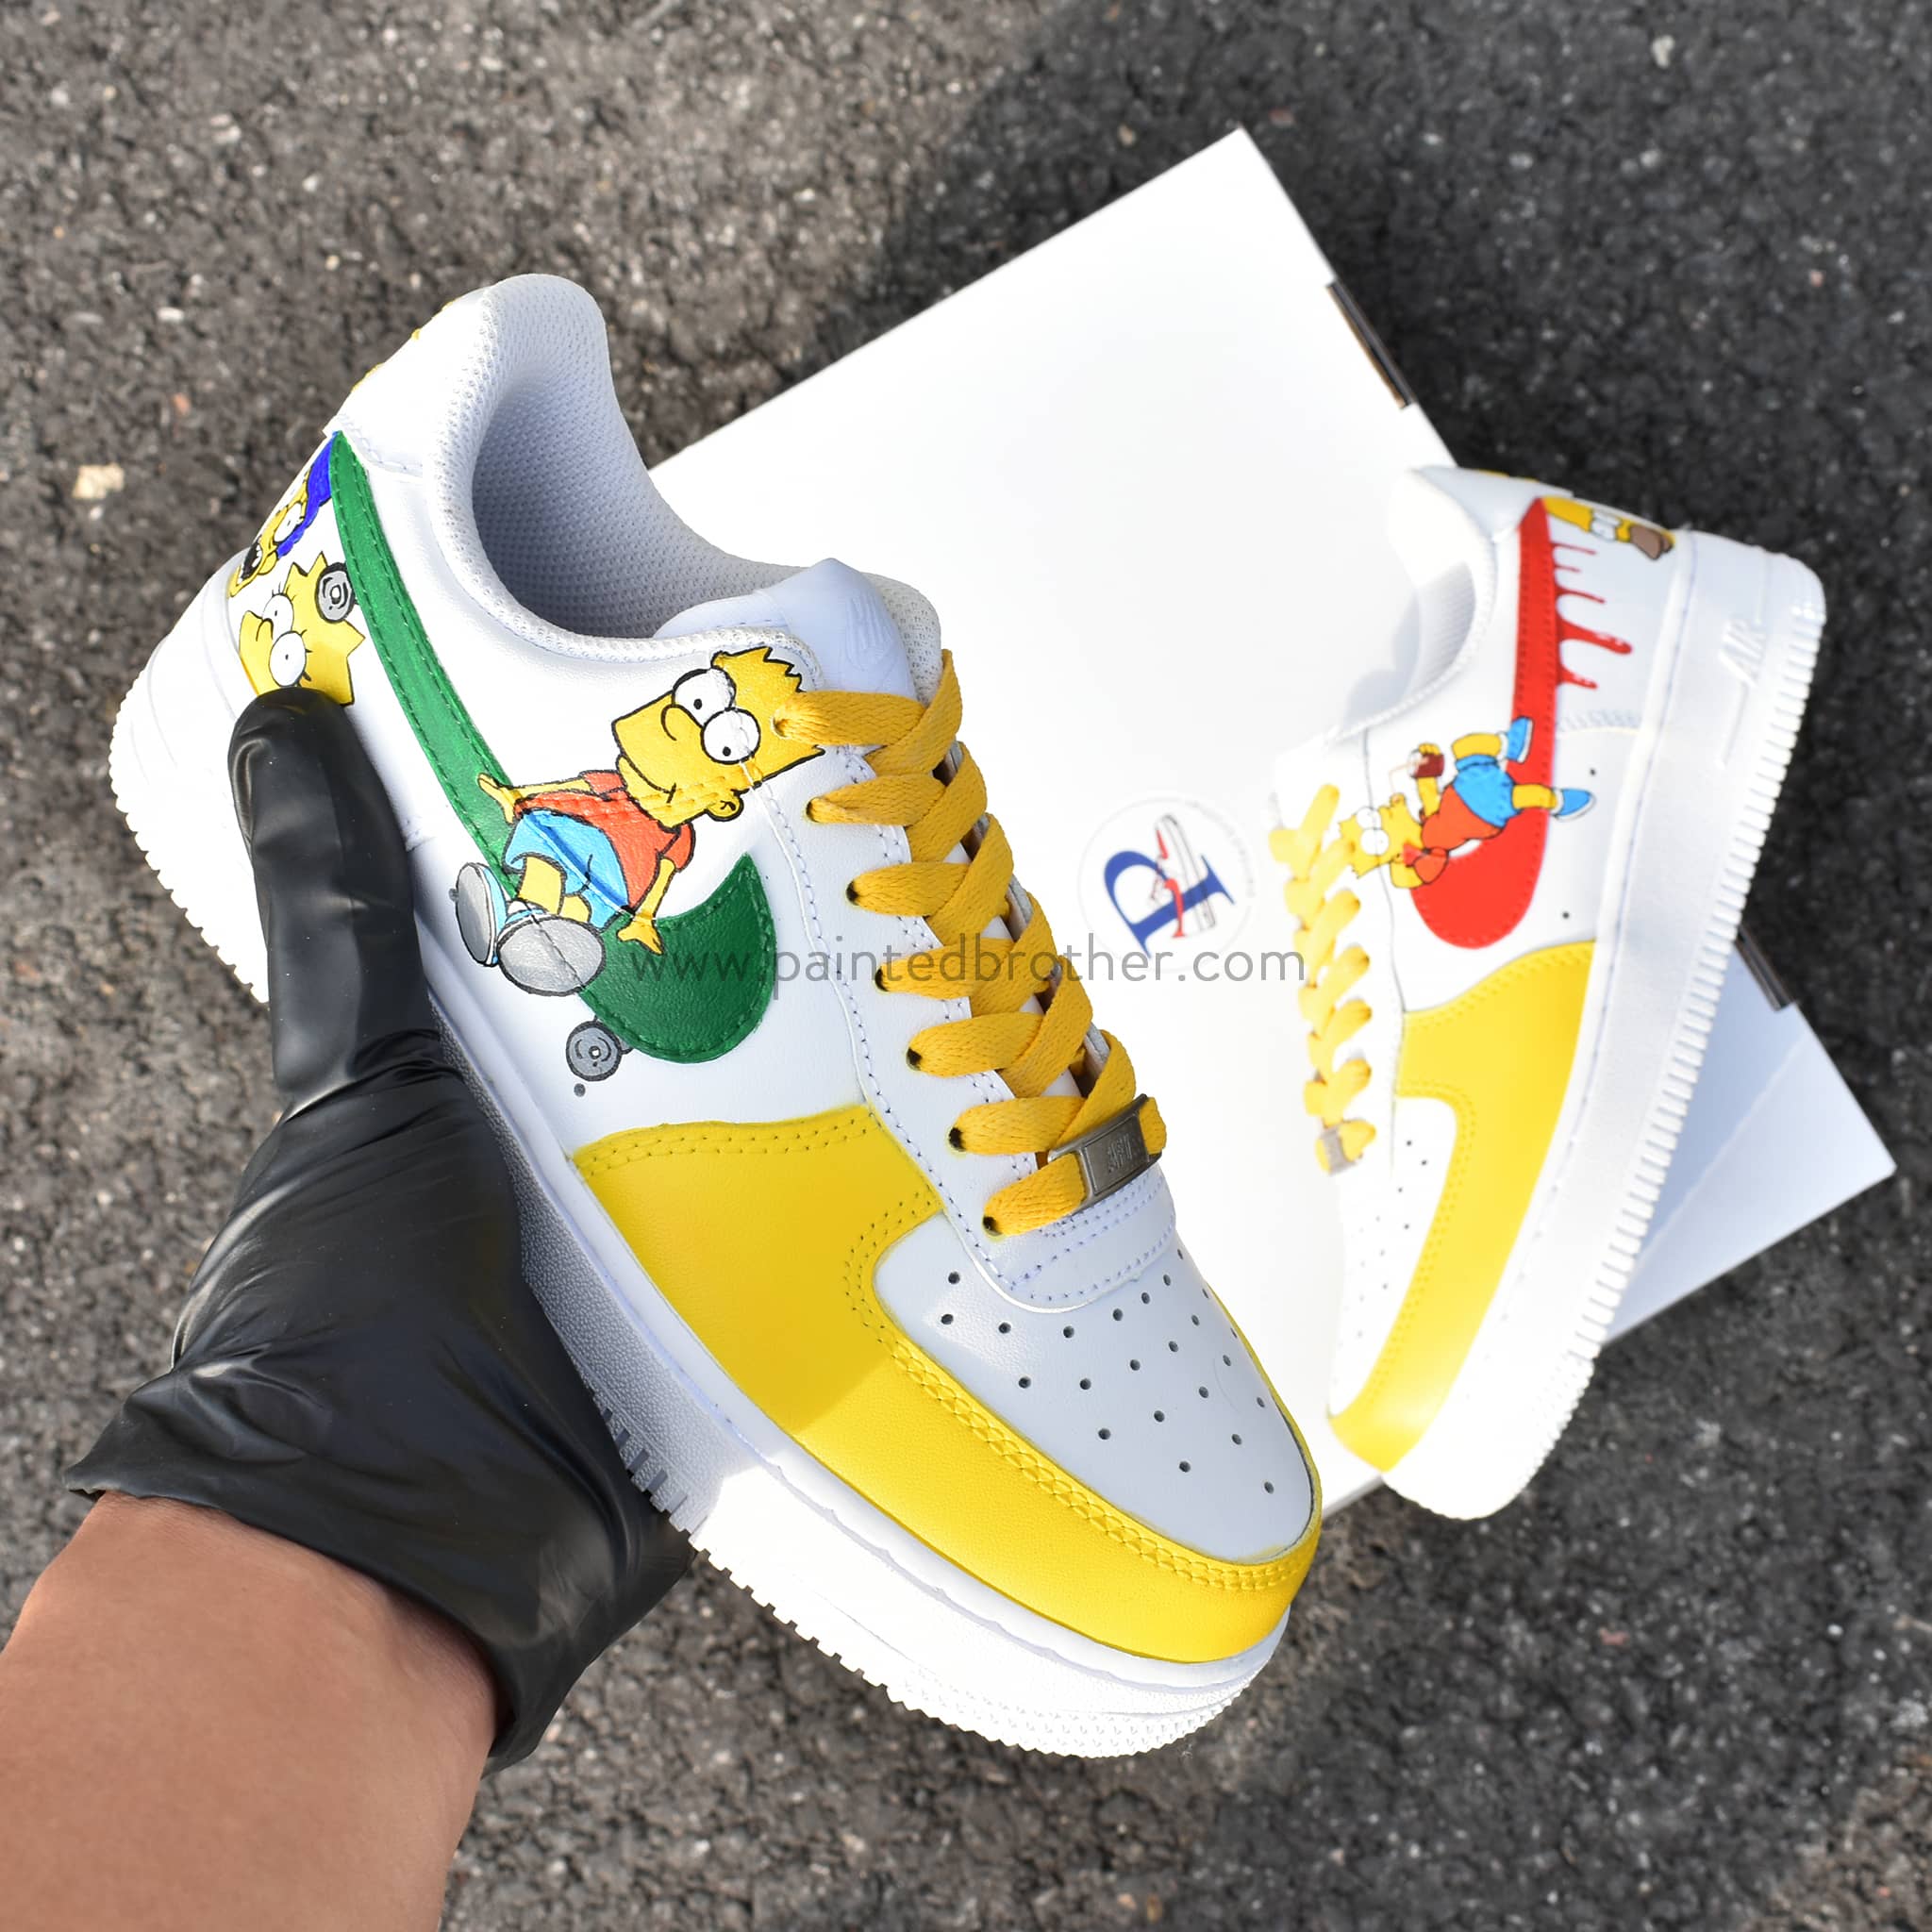 simpsons air forces